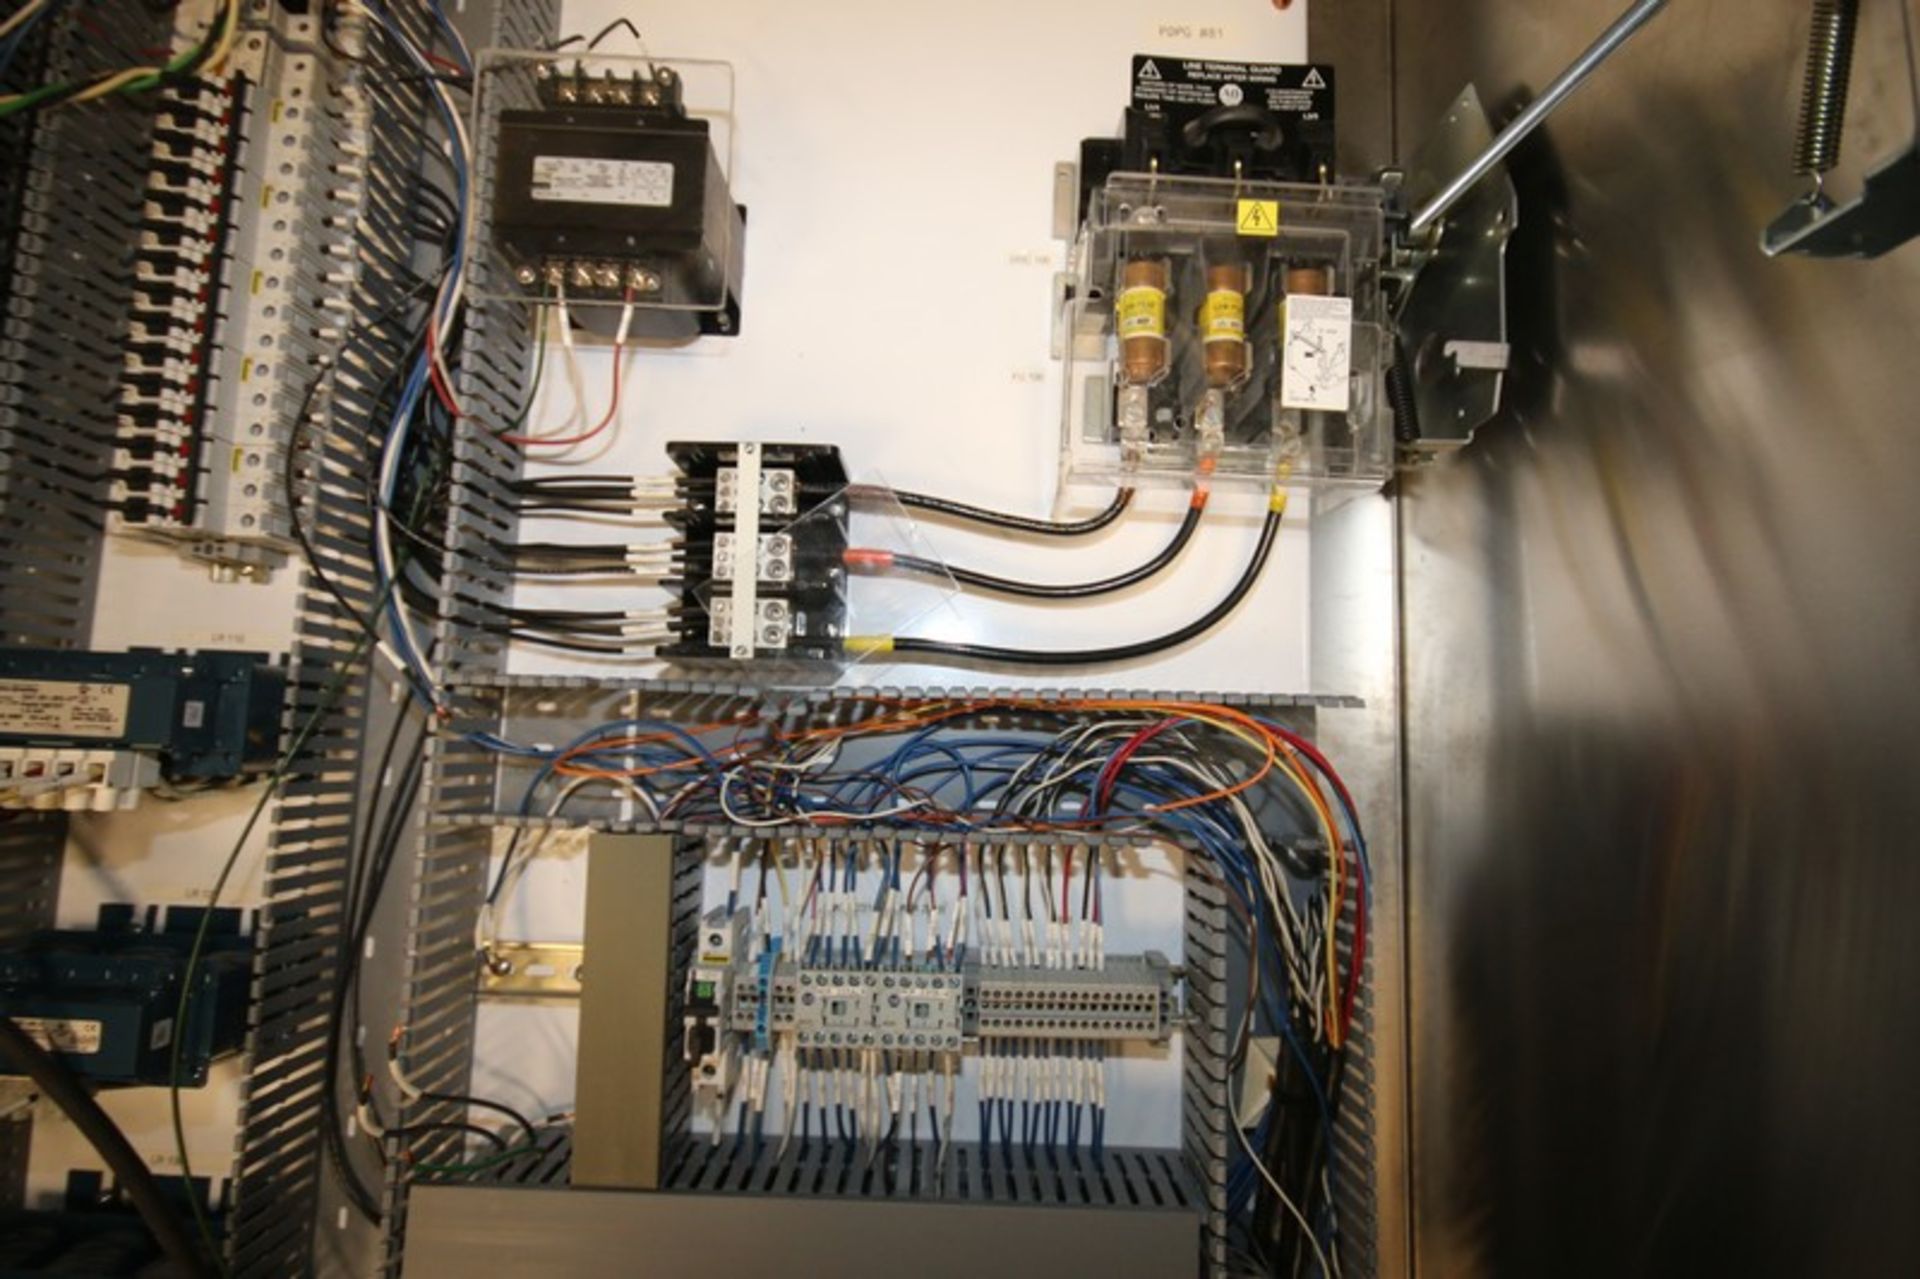 Hoffman 55" L x 38" W x 16" D S/S Control Panel (Hot Water Skid Controls), 480V with Allen Bradley - Image 4 of 6